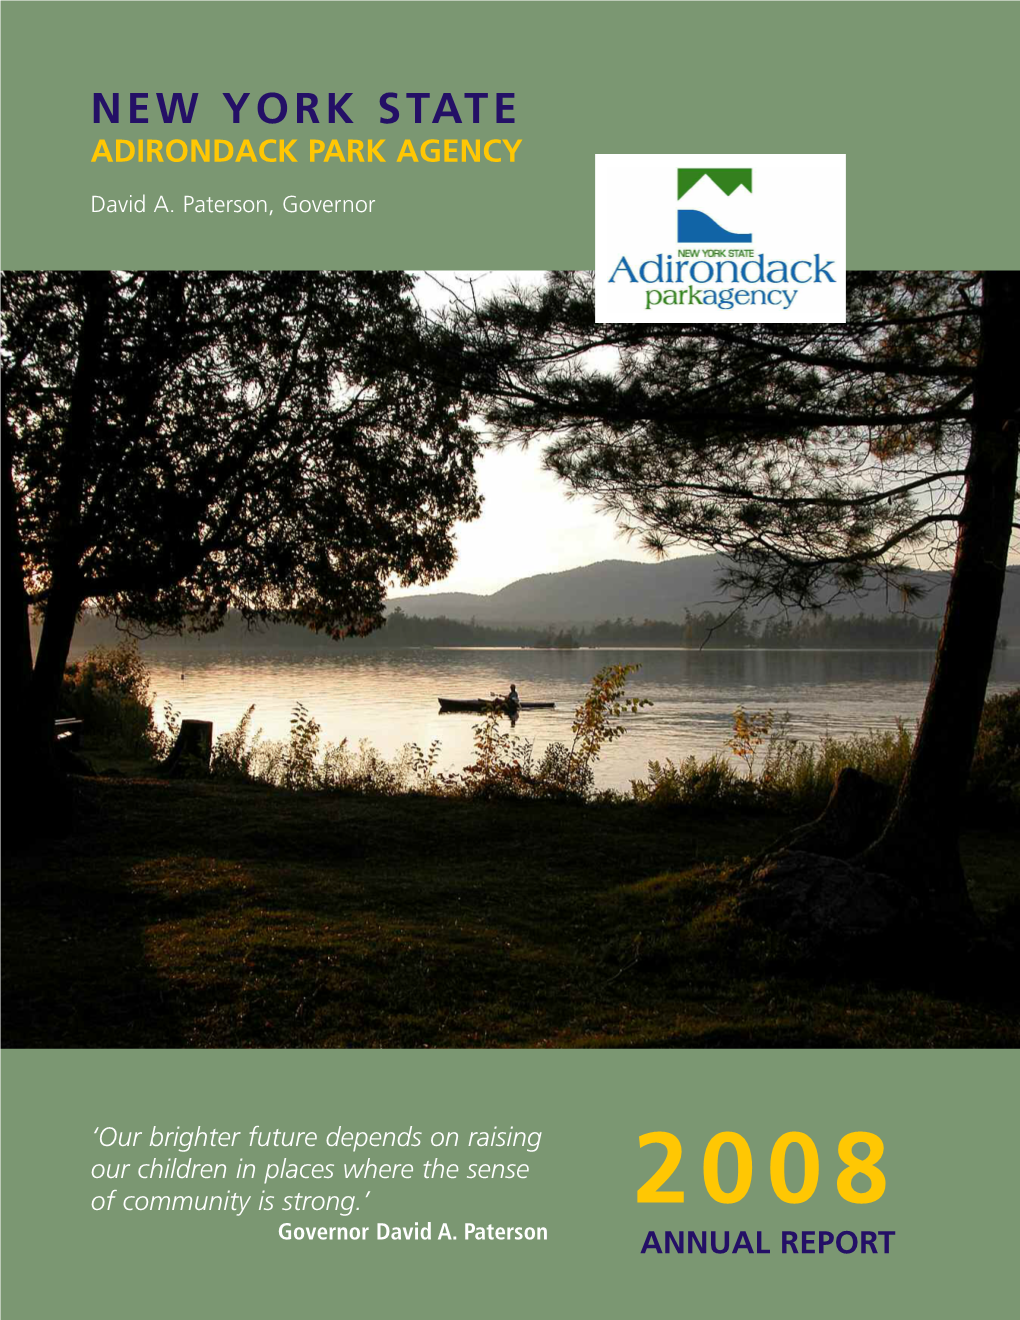 New York State Adirondack Park Agency 2008 Annual Report